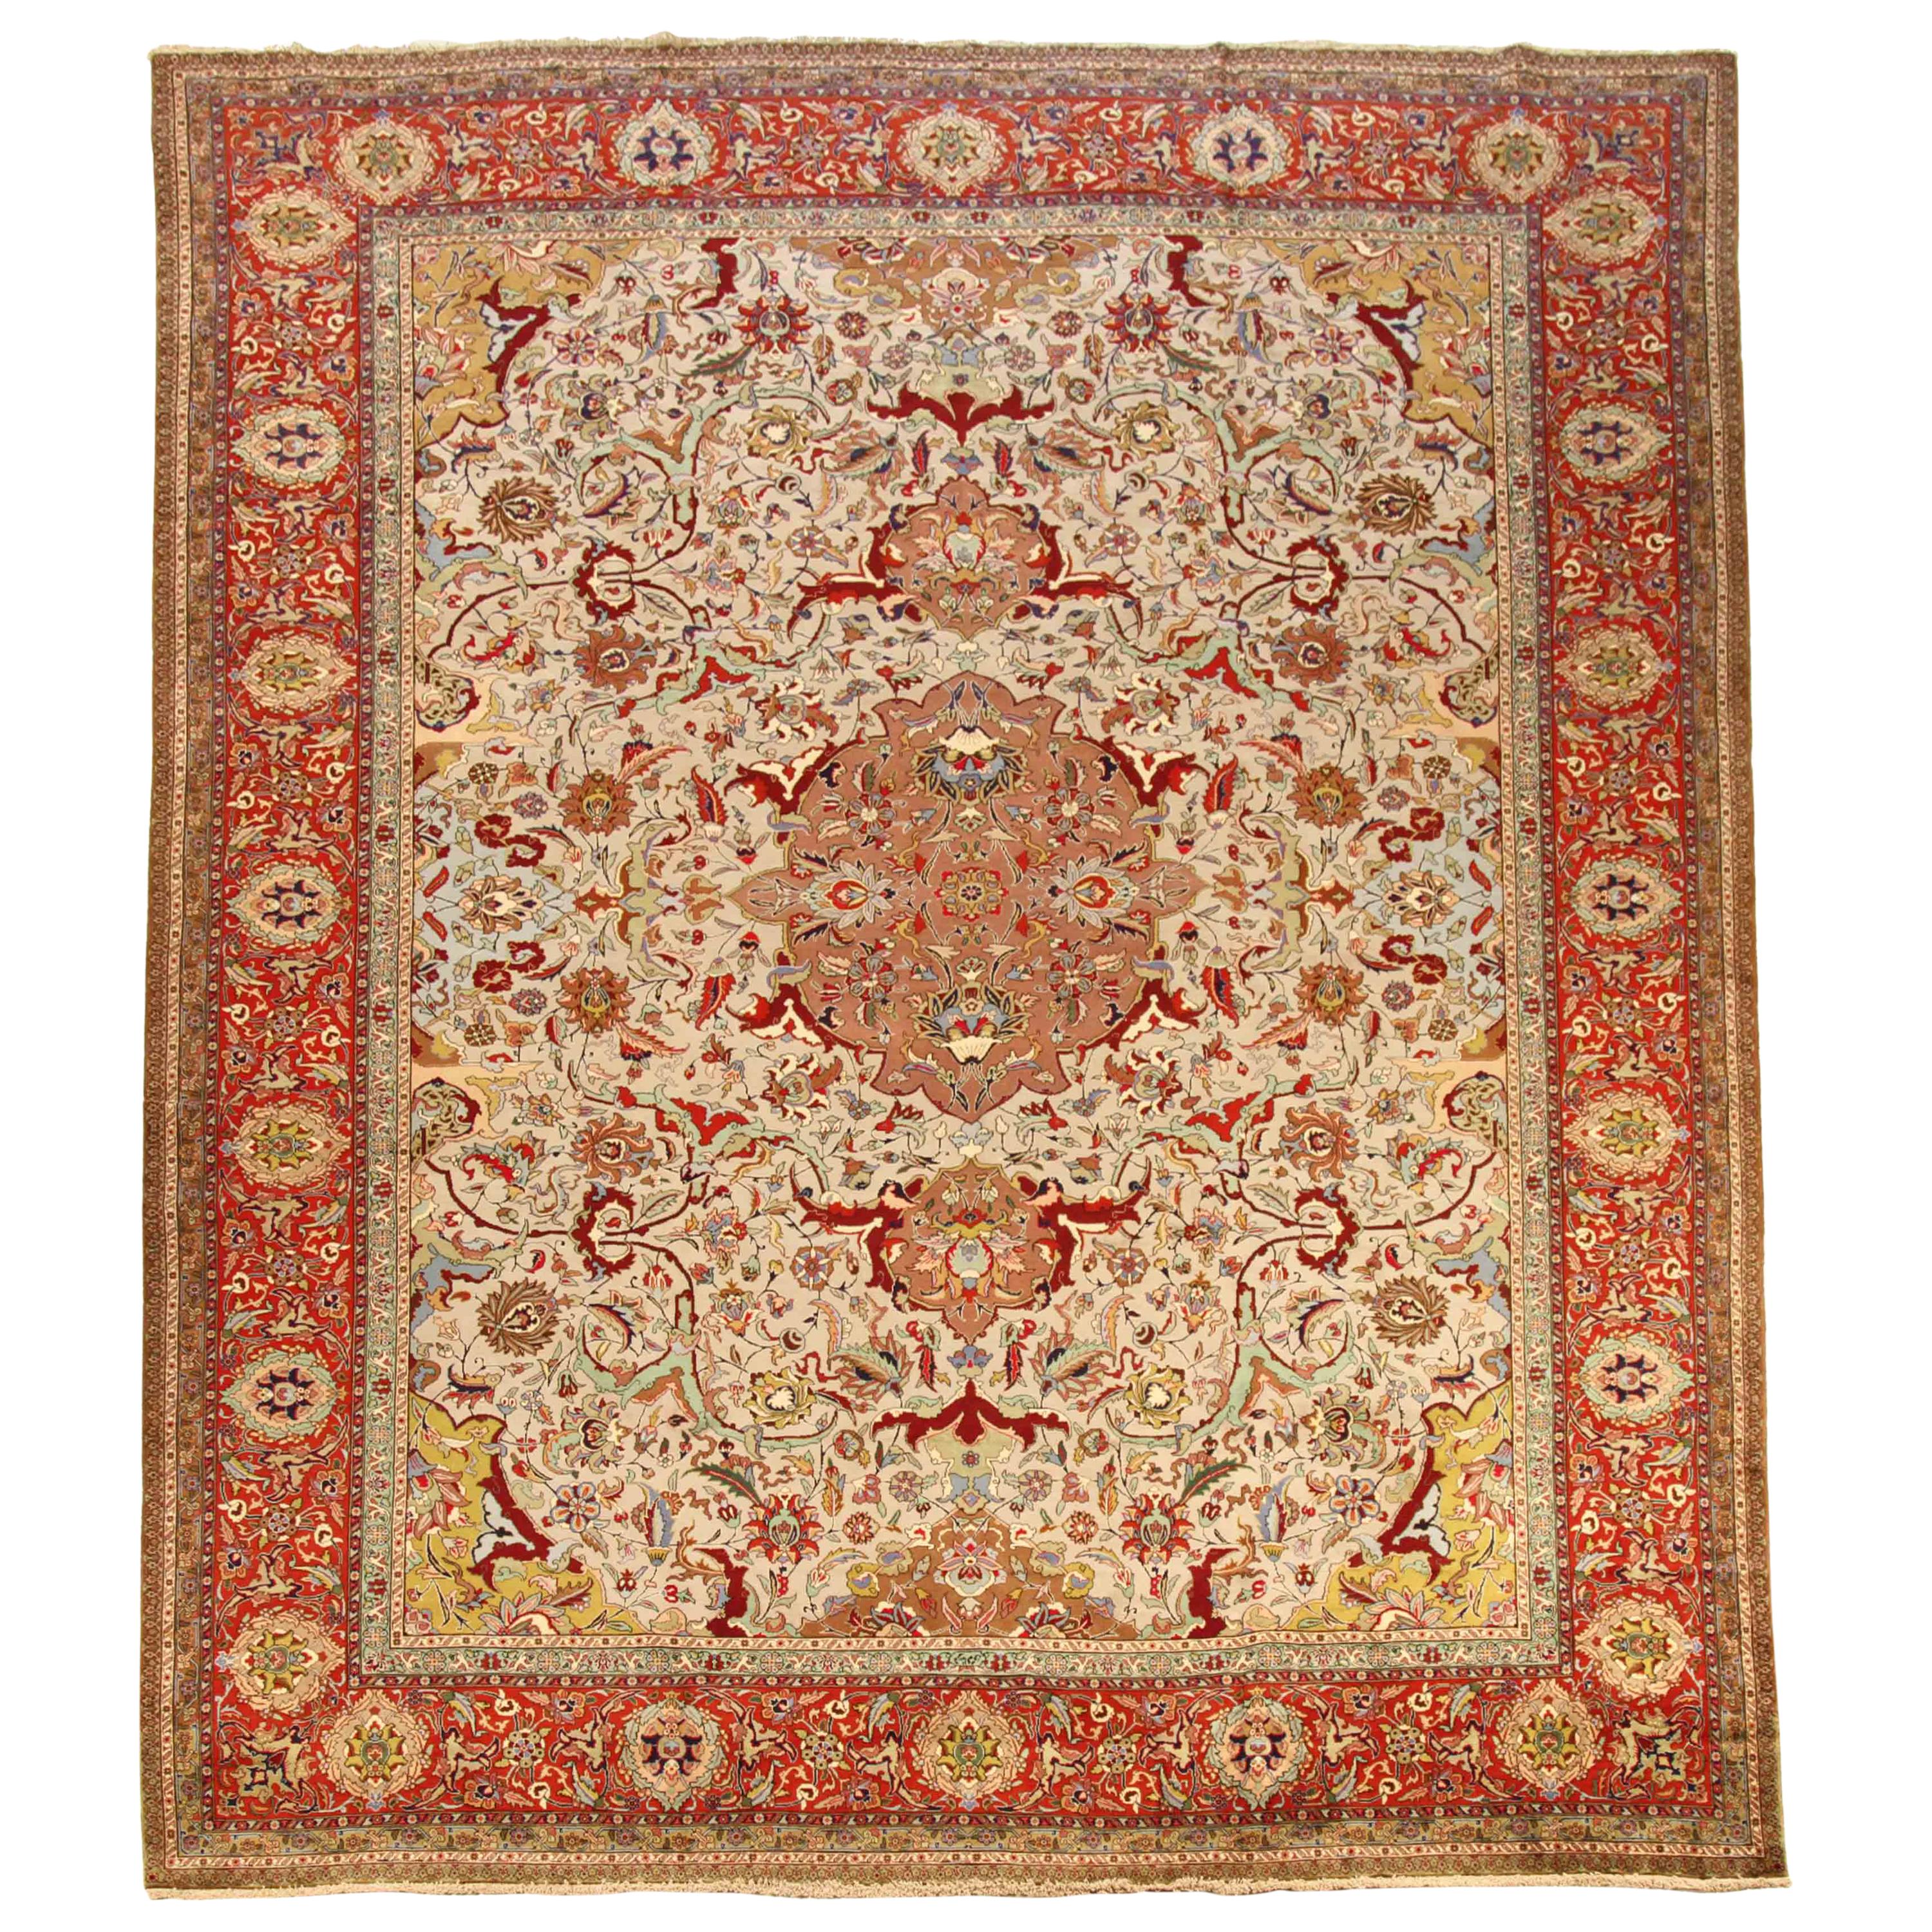 Antique Persian Tabriz Rug with Ivory and Red Floral Patterns, circa 1960s  For Sale at 1stDibs